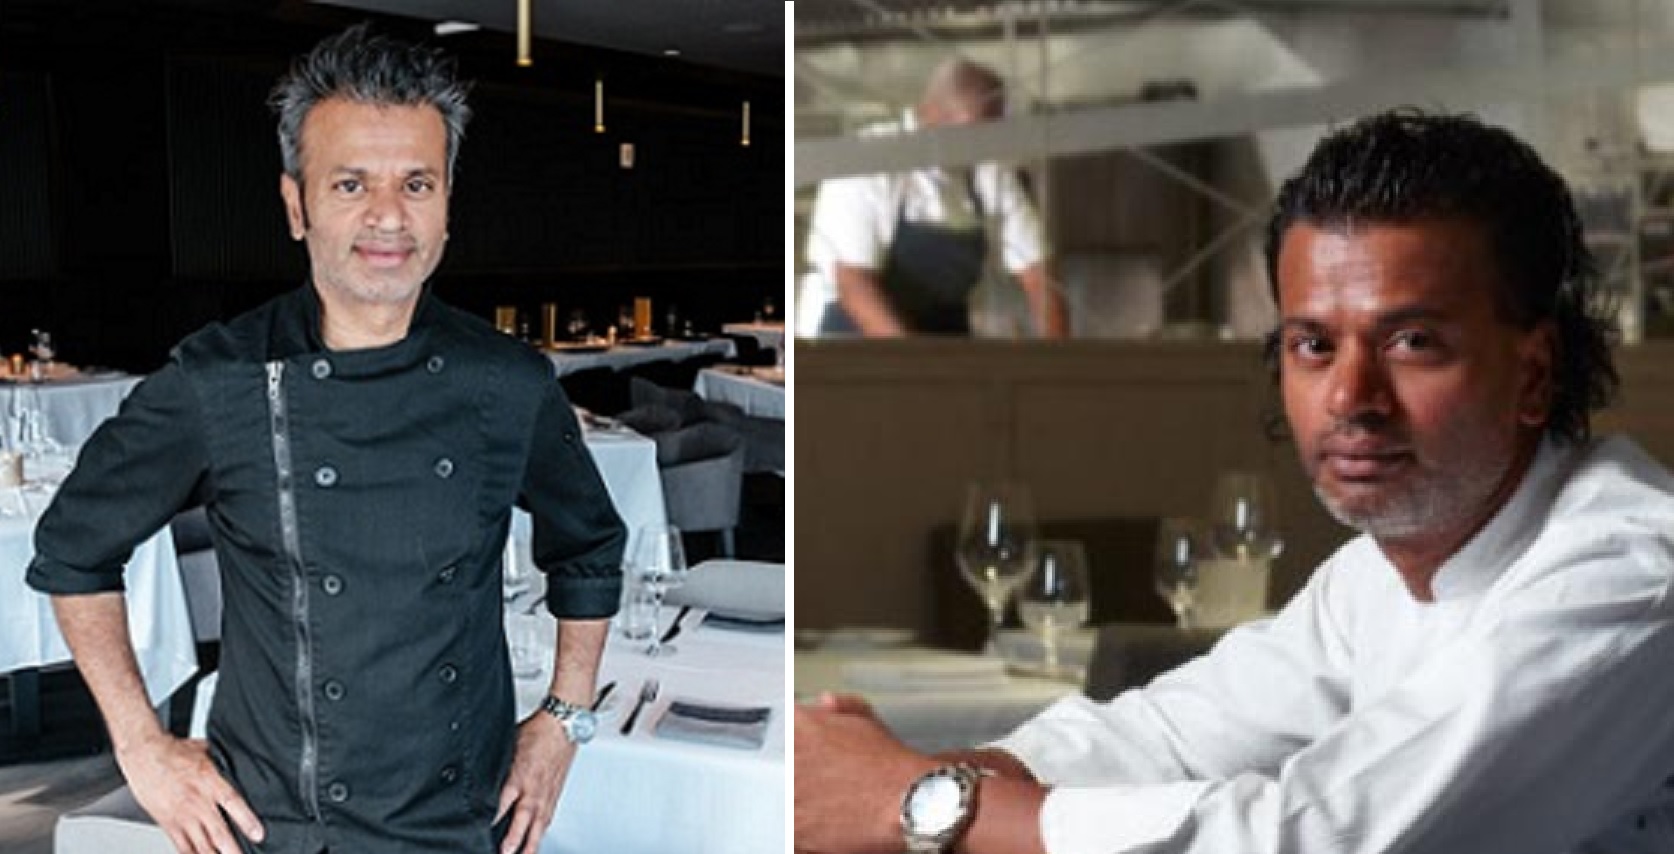 He Used To Eat Out From Garbage, Now He’s a Chef at His Own High-End Restaurant in Canada – Success Story Of Sash Simpson